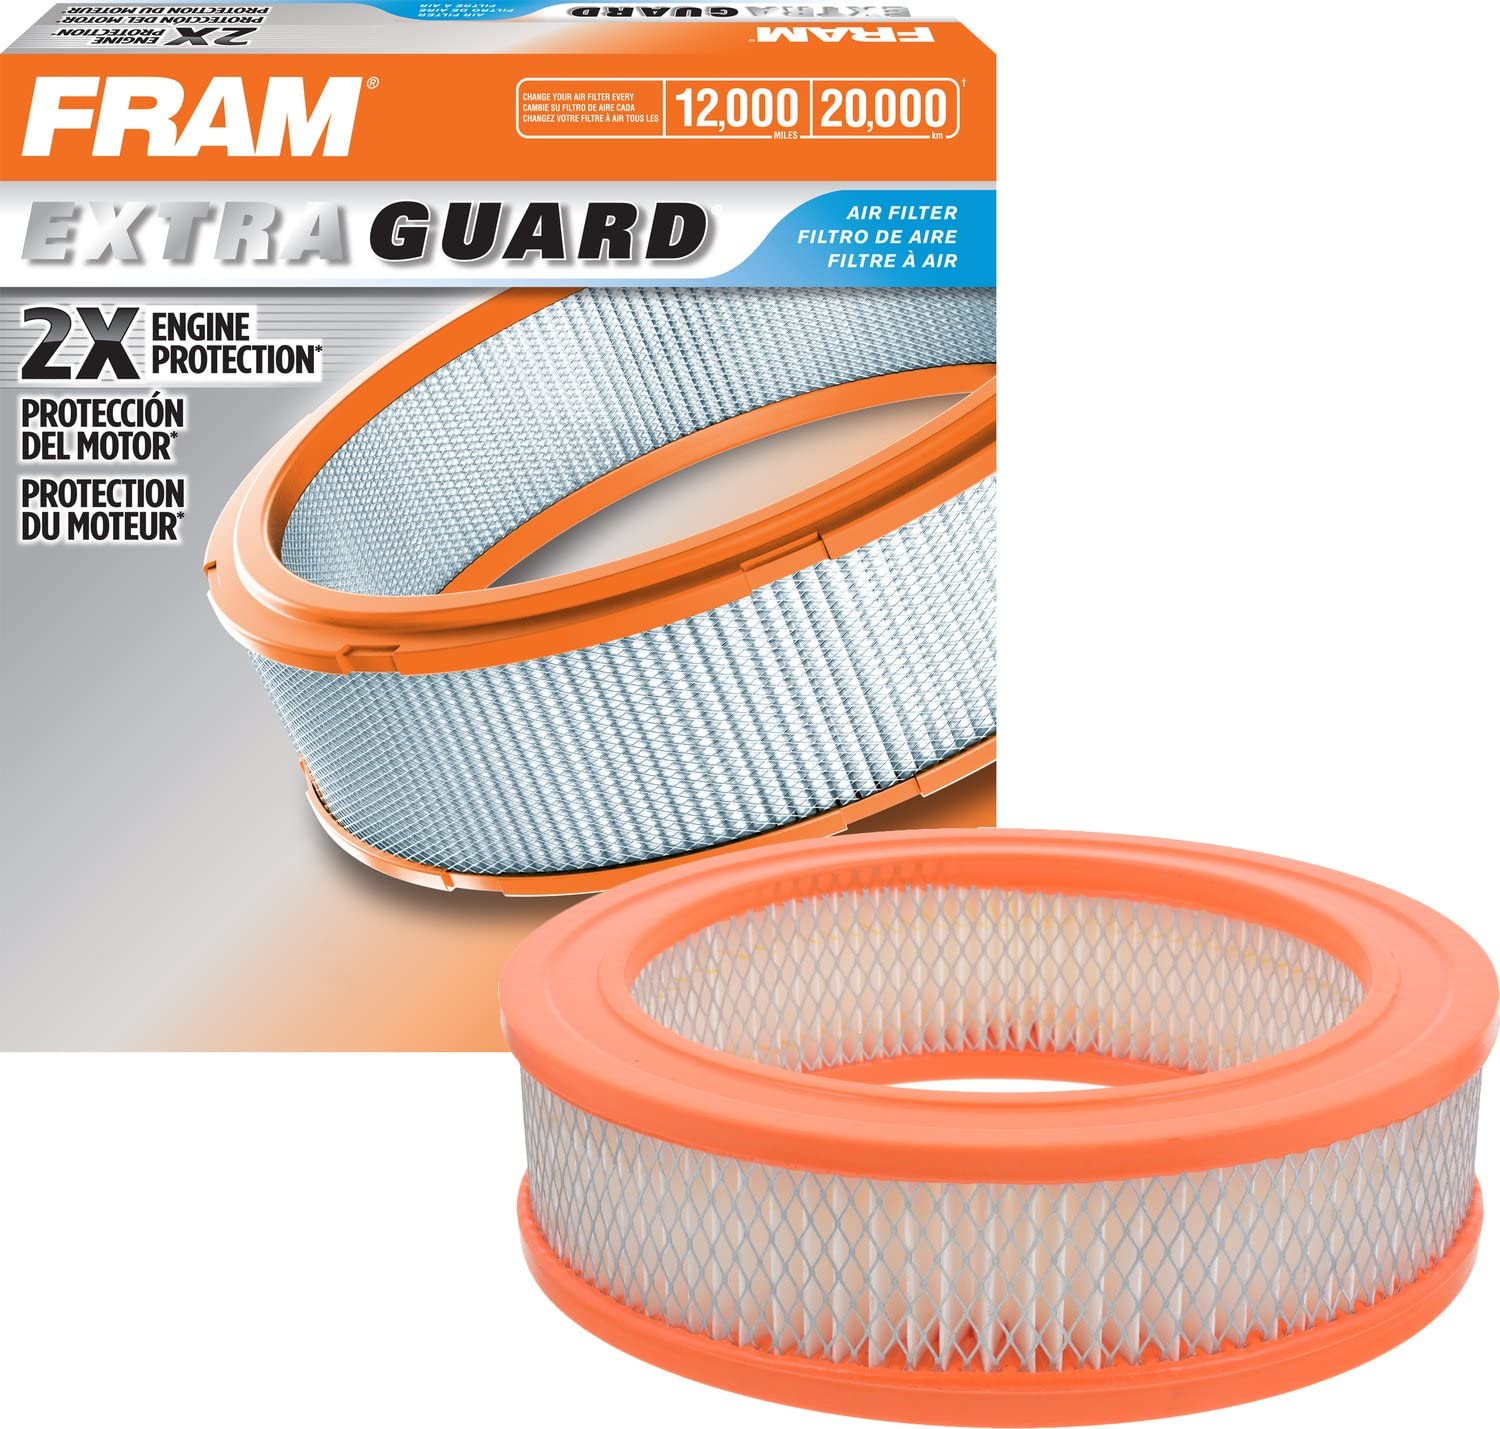 FRAM Extra Guard CA160 Air Filter for Select American Engines, Checker, Chrysler, Dodge, Fargo, Jeep and Plymouth Vehicles